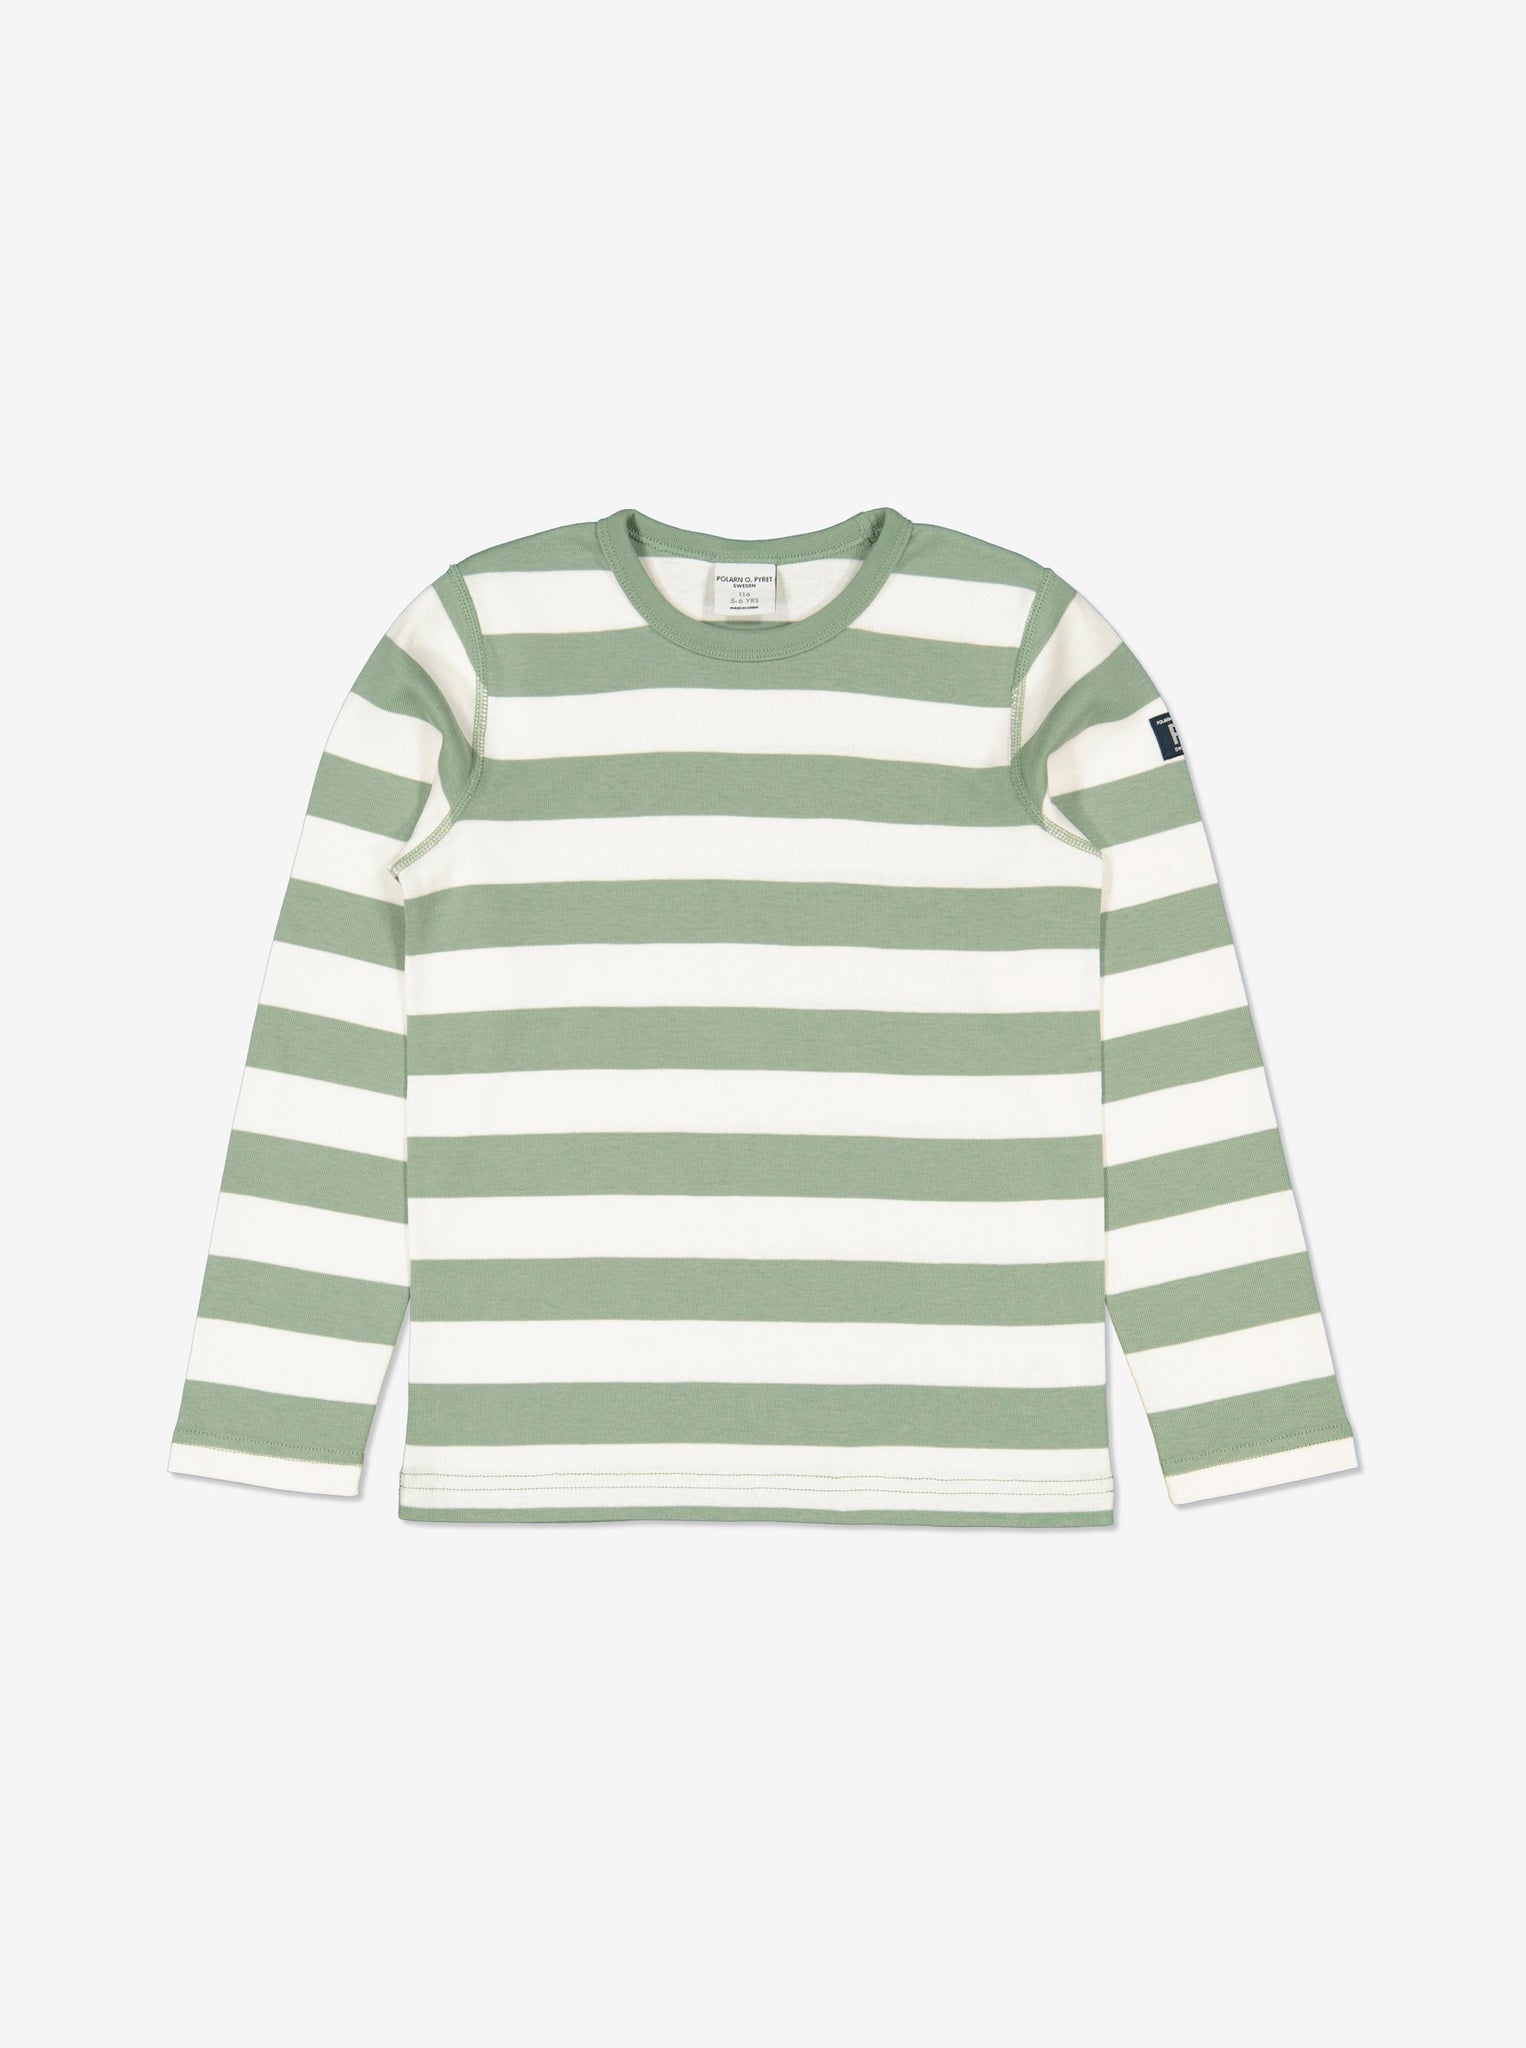  Organic Cotton Green Striped Kids Top from Polarn O. Pyret Kidswear. Made using ethically sourced materials.